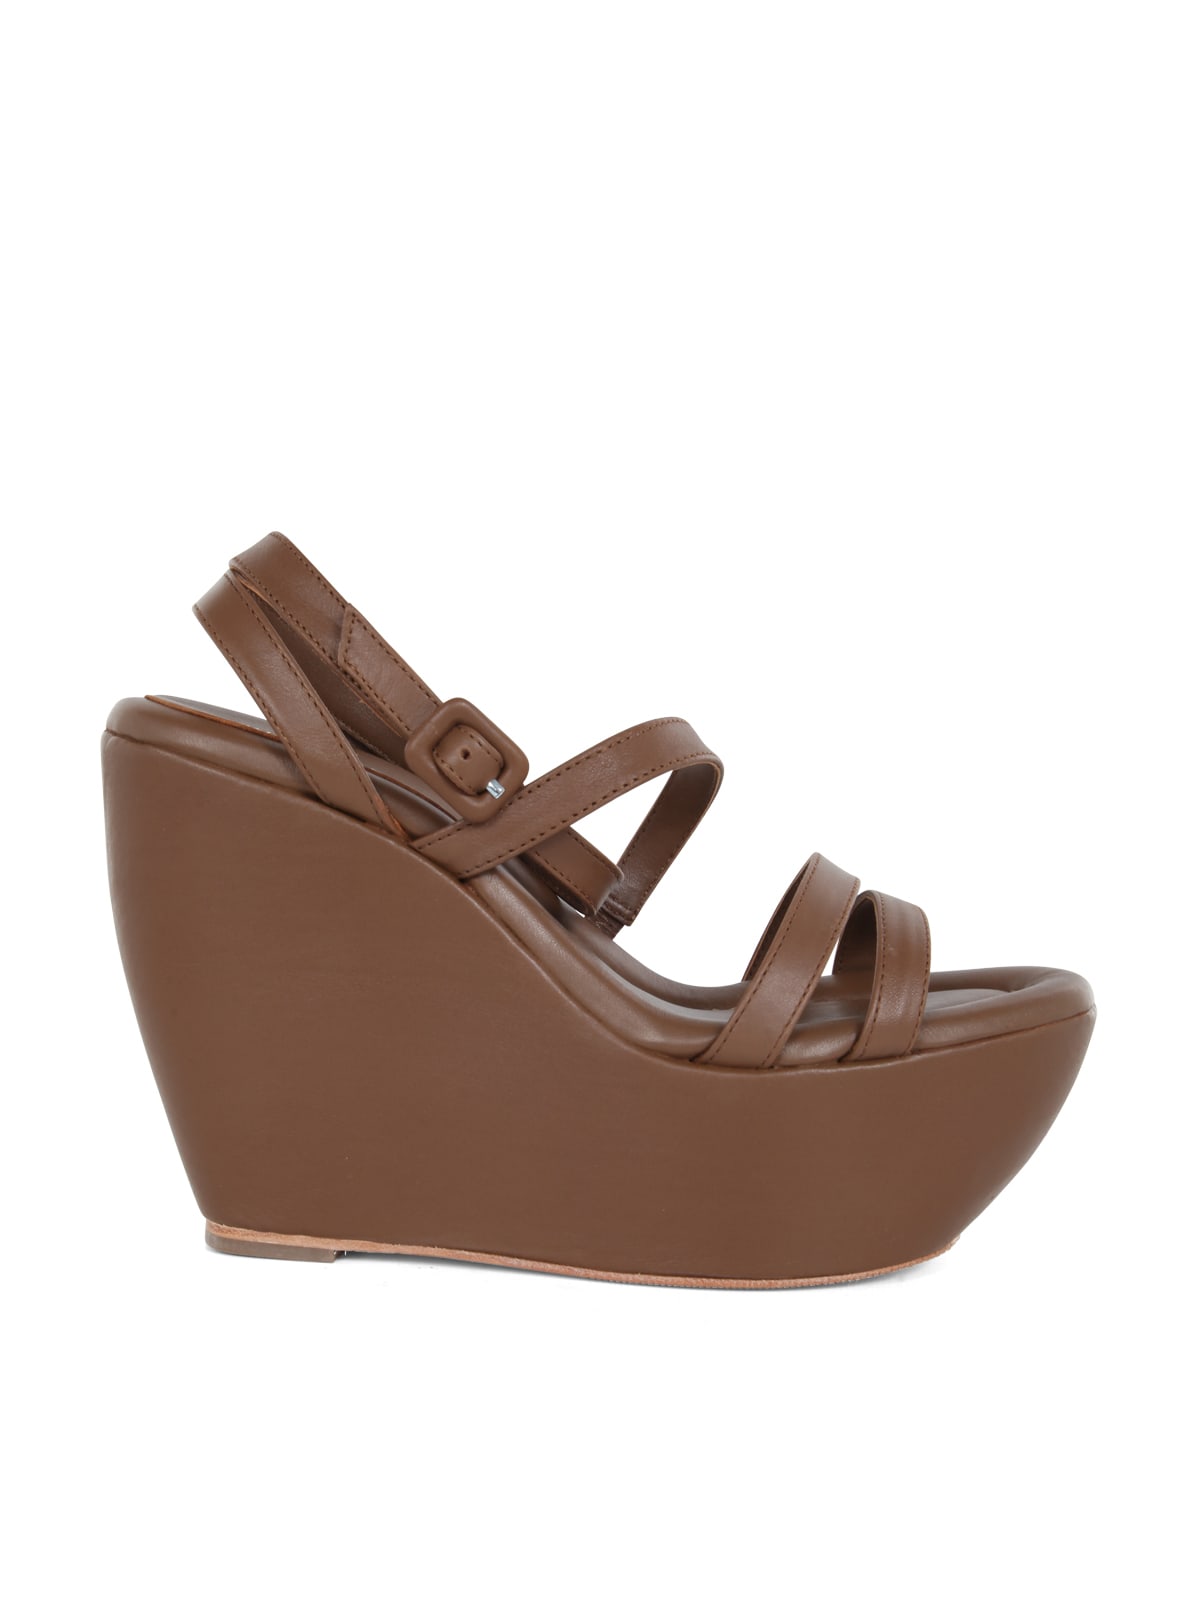 Paloma Barceló Iraide Wedge Sandals With Ankle Bands